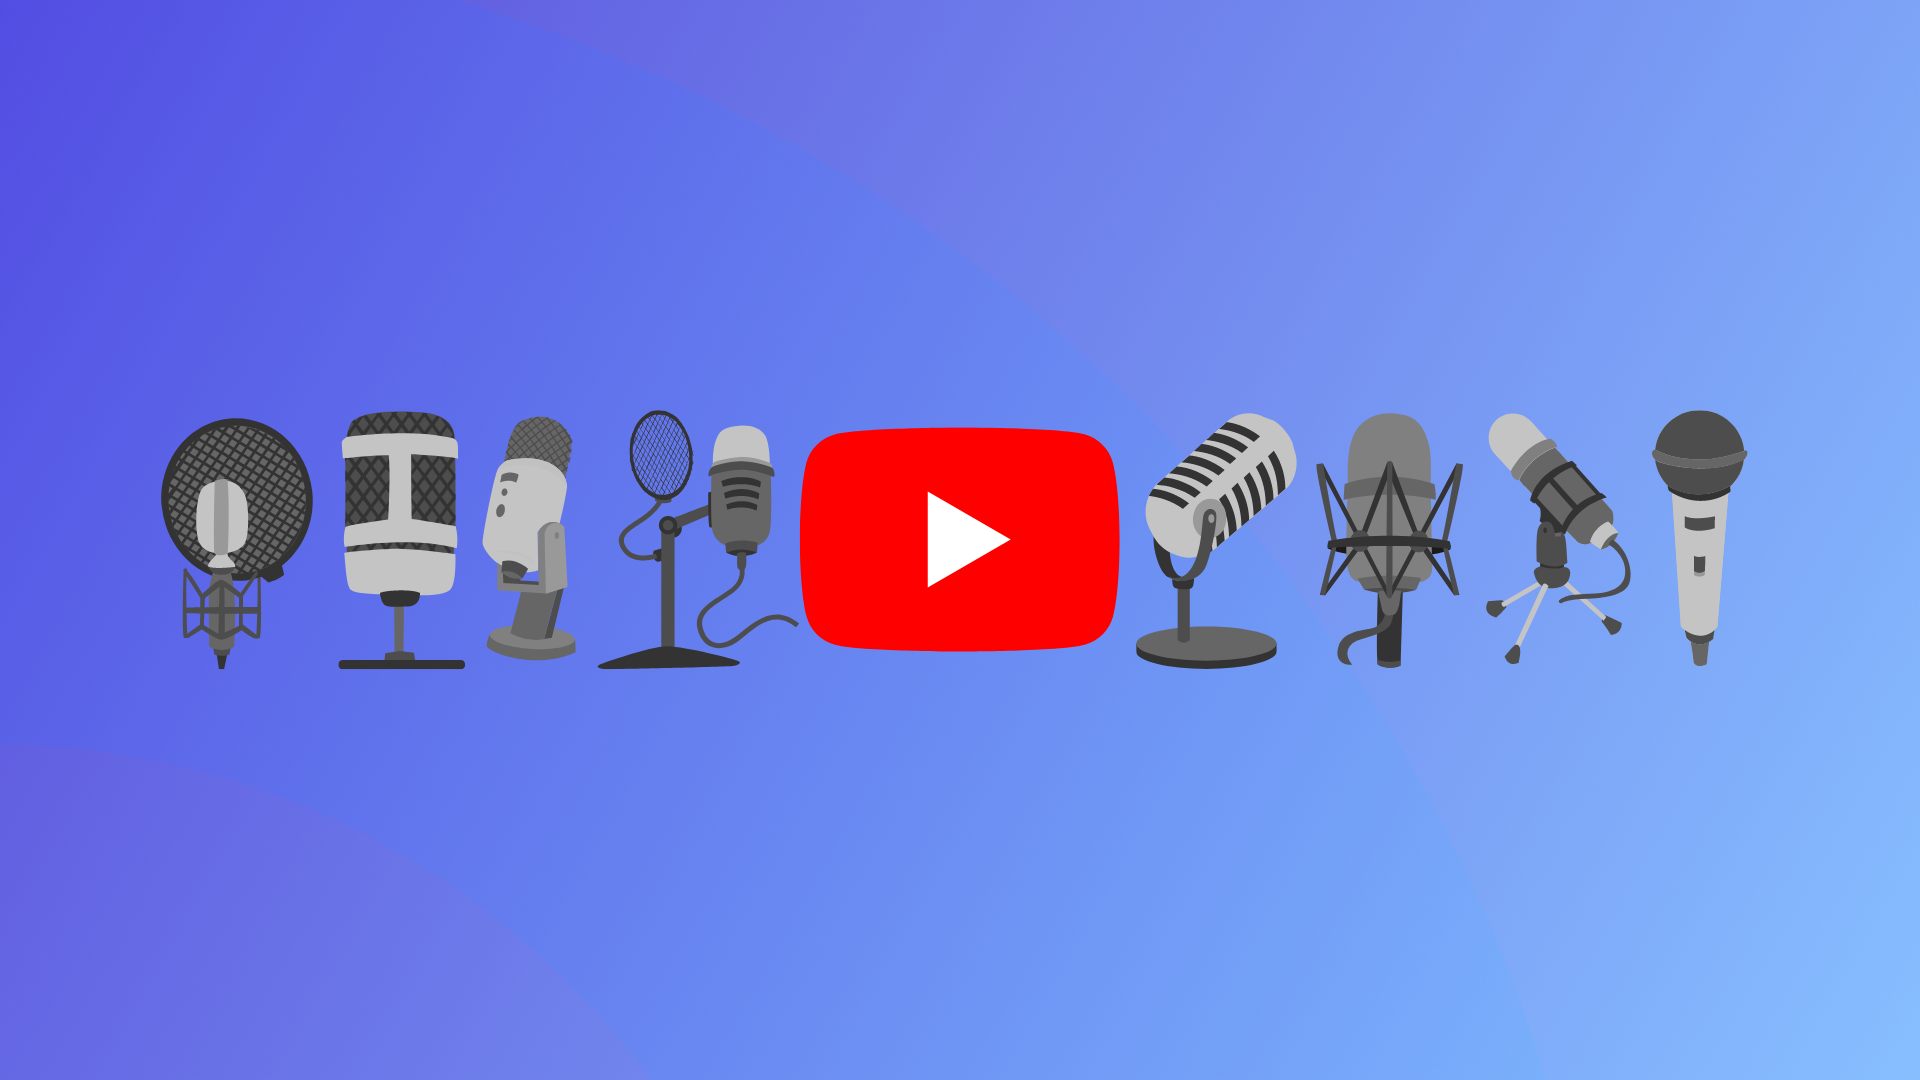 Timer Clock Animation , cartoon microphone transparent background PNG  clipart